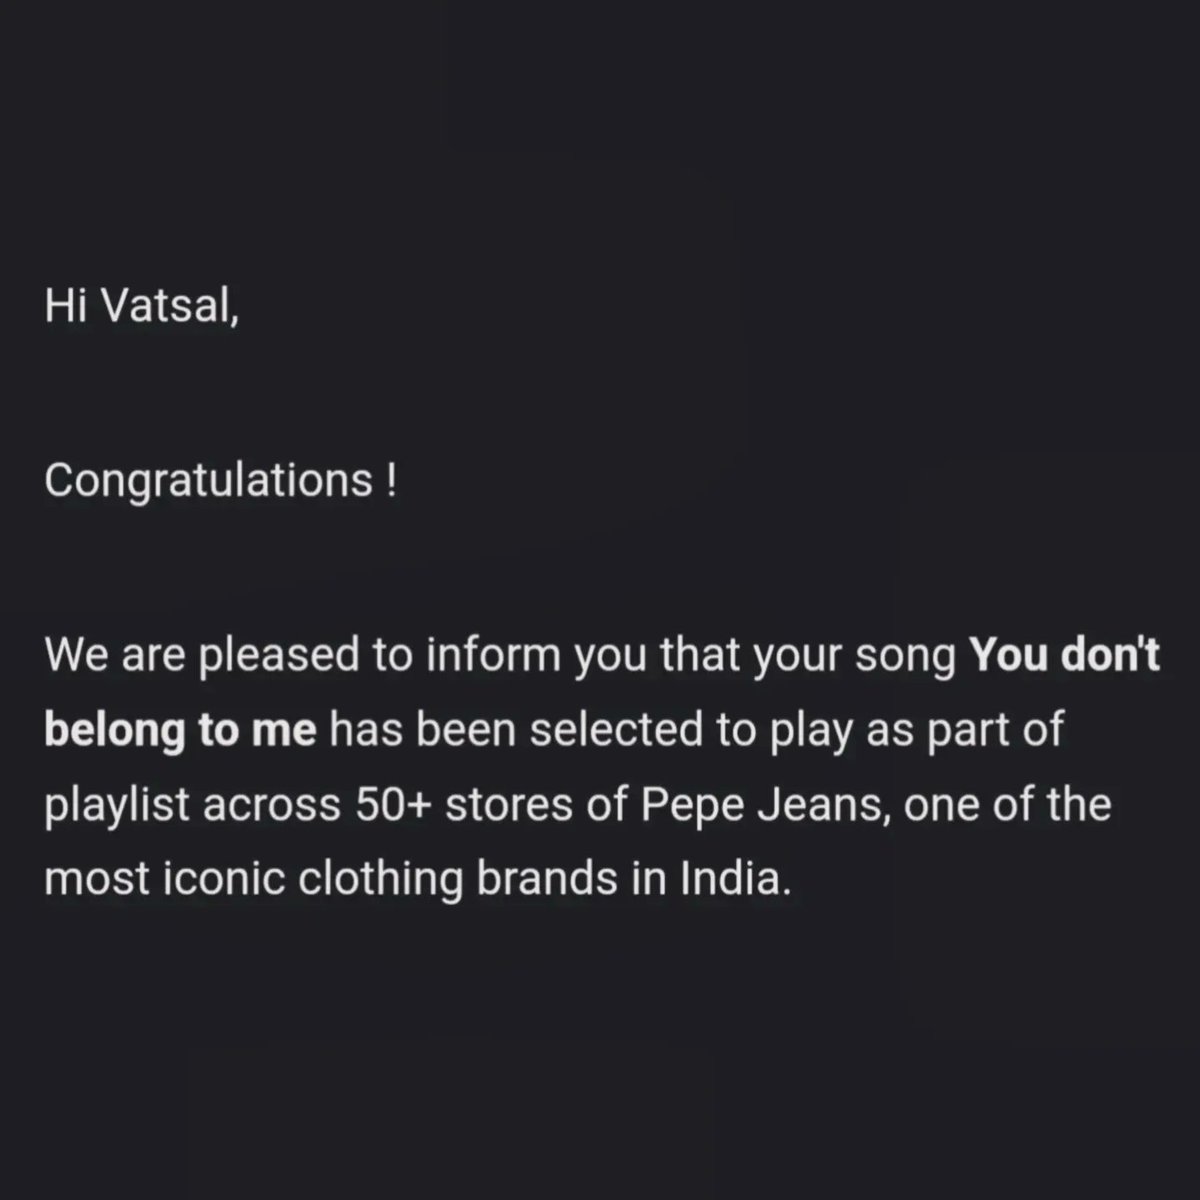 Excited to share that you don't belong to me is selected to play as a part of the playlist across 50+ stores of @pepejeansindia one of the most iconic clothing brands in India. 
Special thanks to @songdew for helping me get there!
#branddeal #pepejeans #pepejeansindia #pepejeans